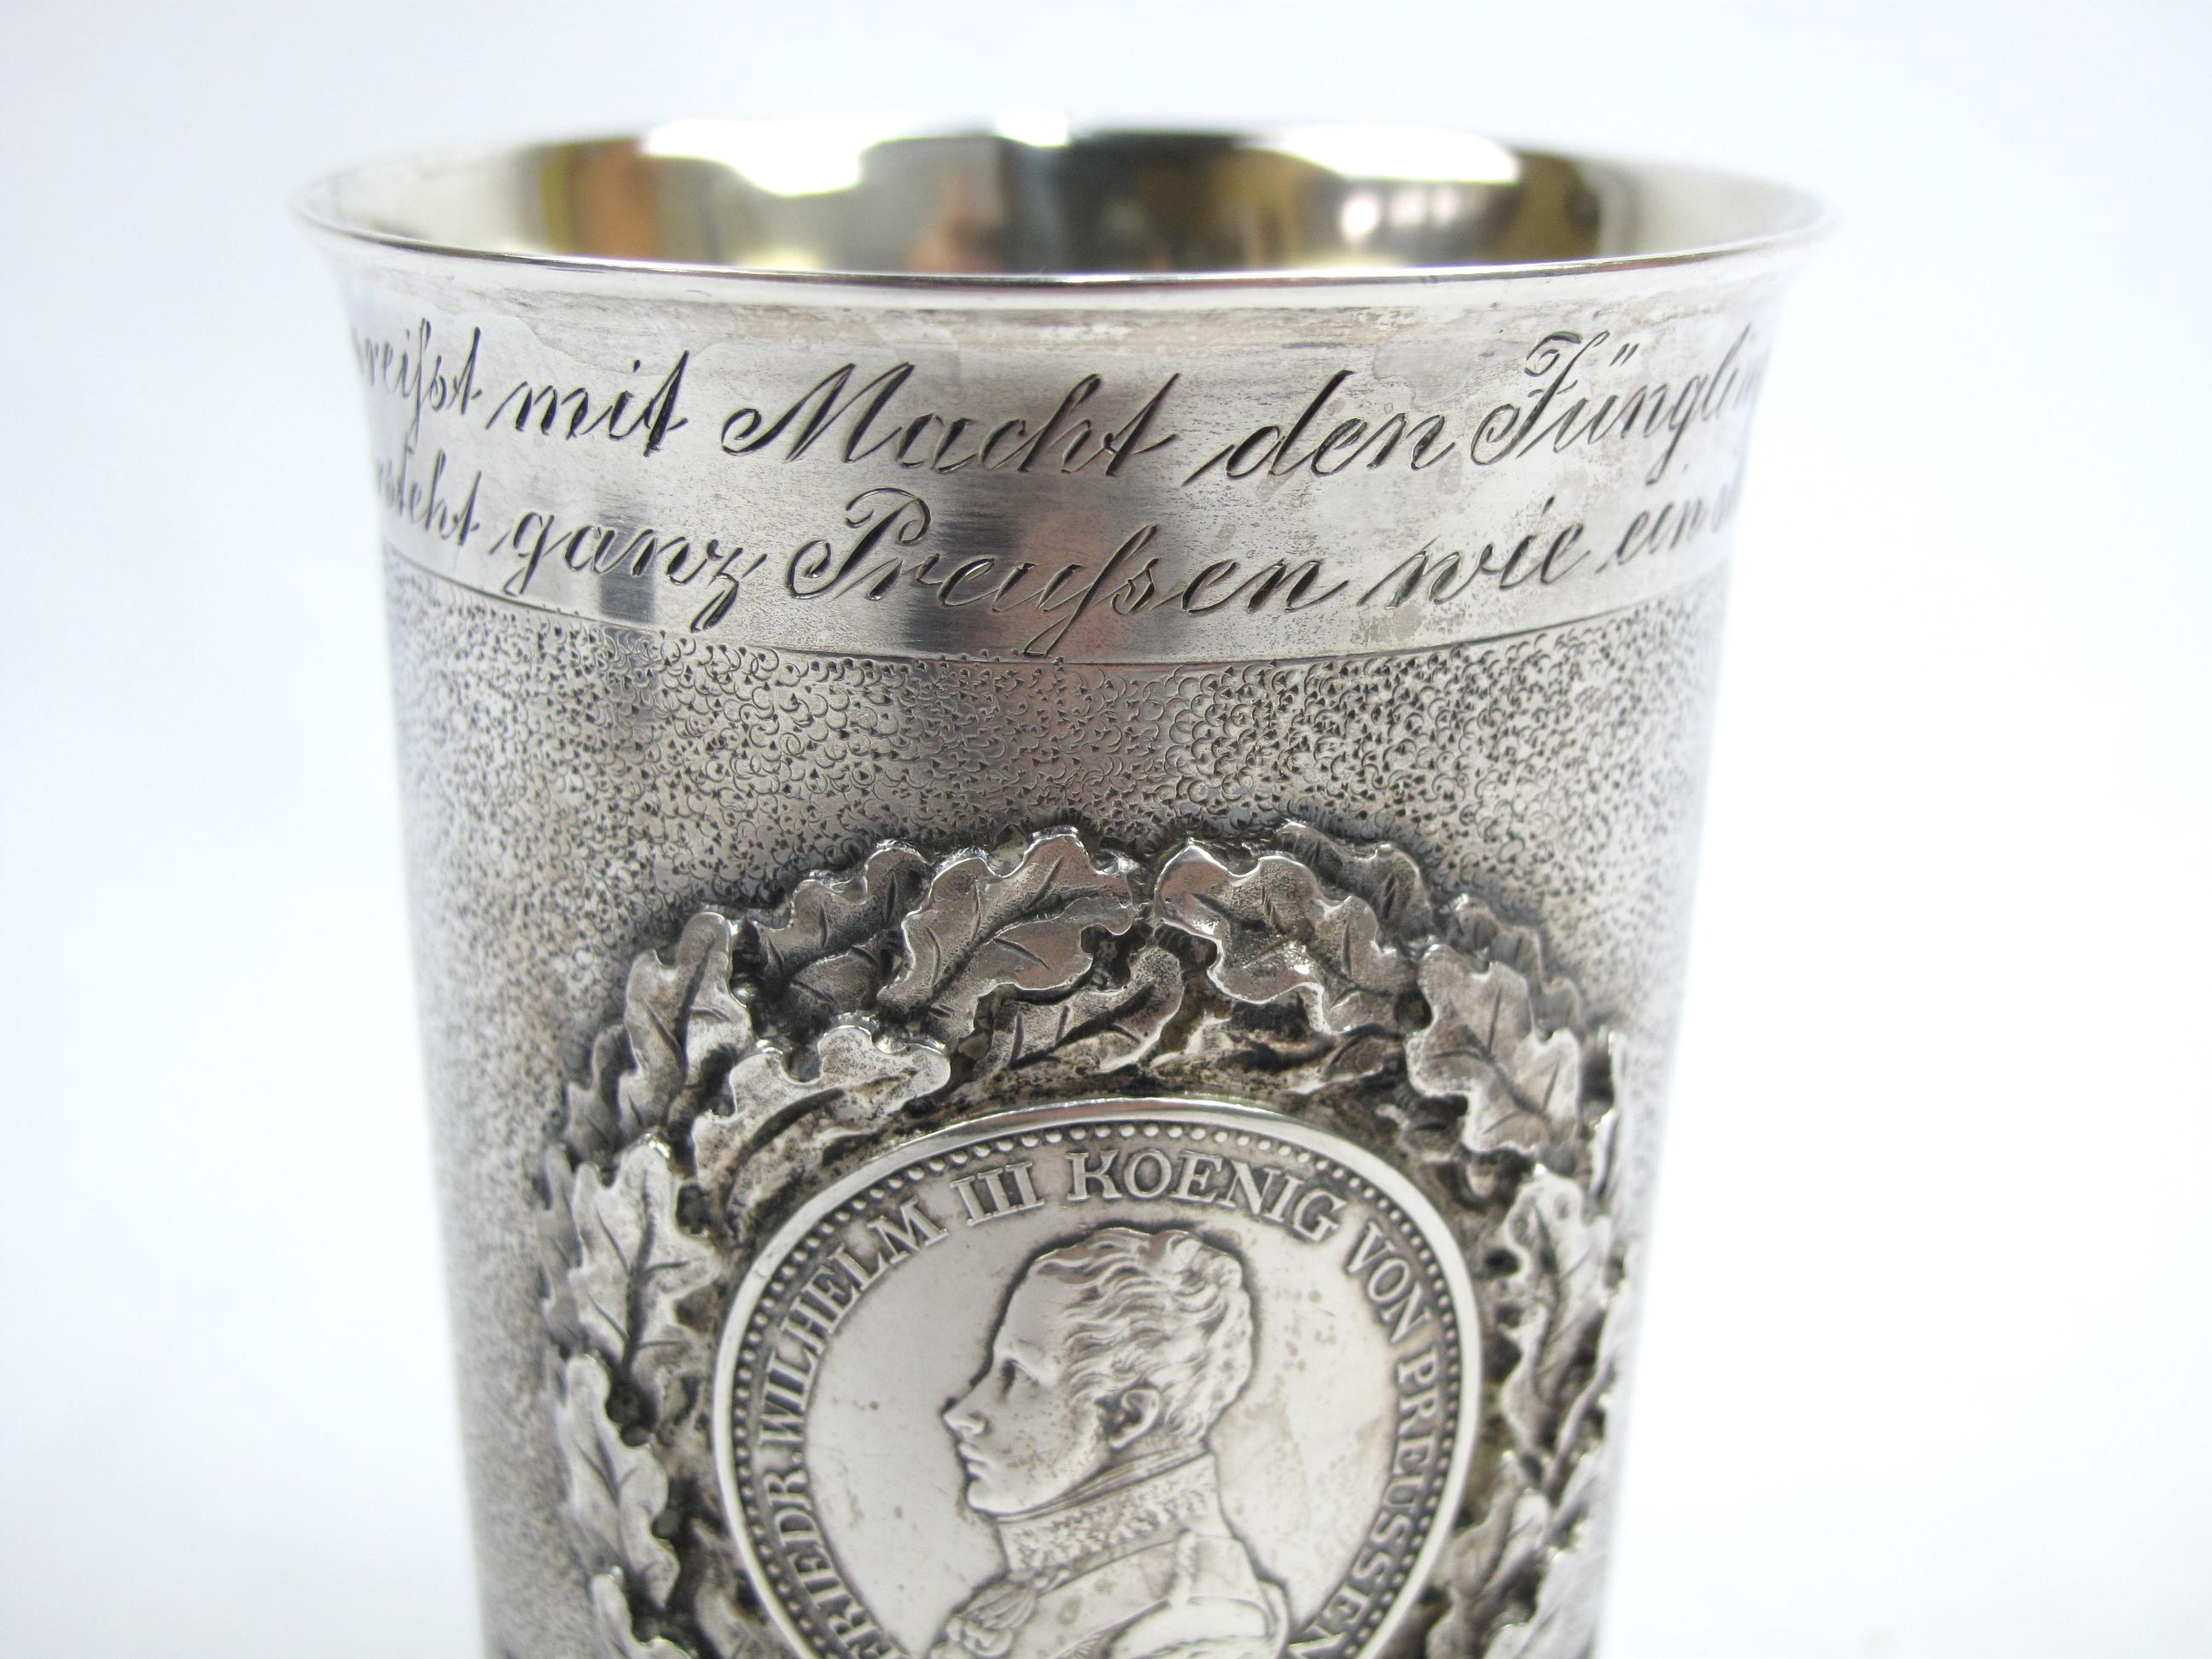 German Silver commemorative beaker belonging to a named veteran of the Garde-Volontar-Kosak. An interesting variant of the Munzbecher (coin beaker) style drinking cup or pokal. 

The Garde-Volontar-Kosak was a squadron of volunteers (exempt from